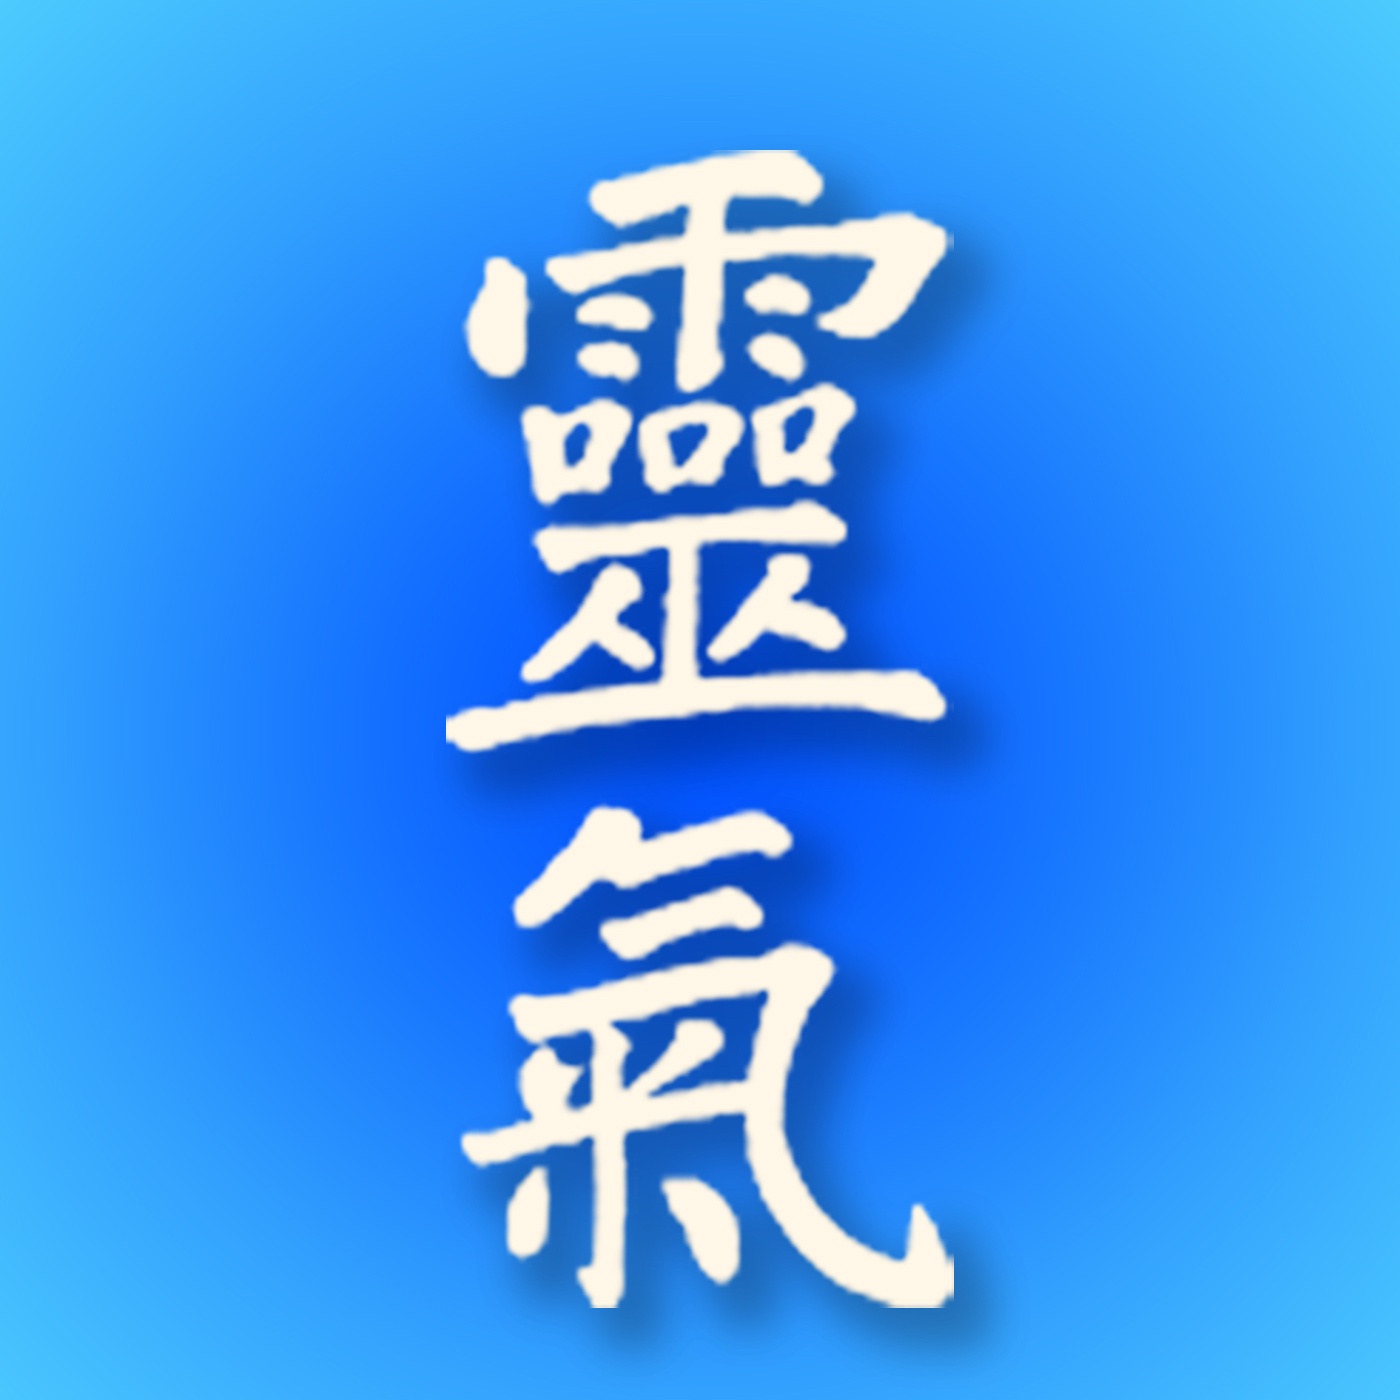 The meaning of traditional in Usui Reiki